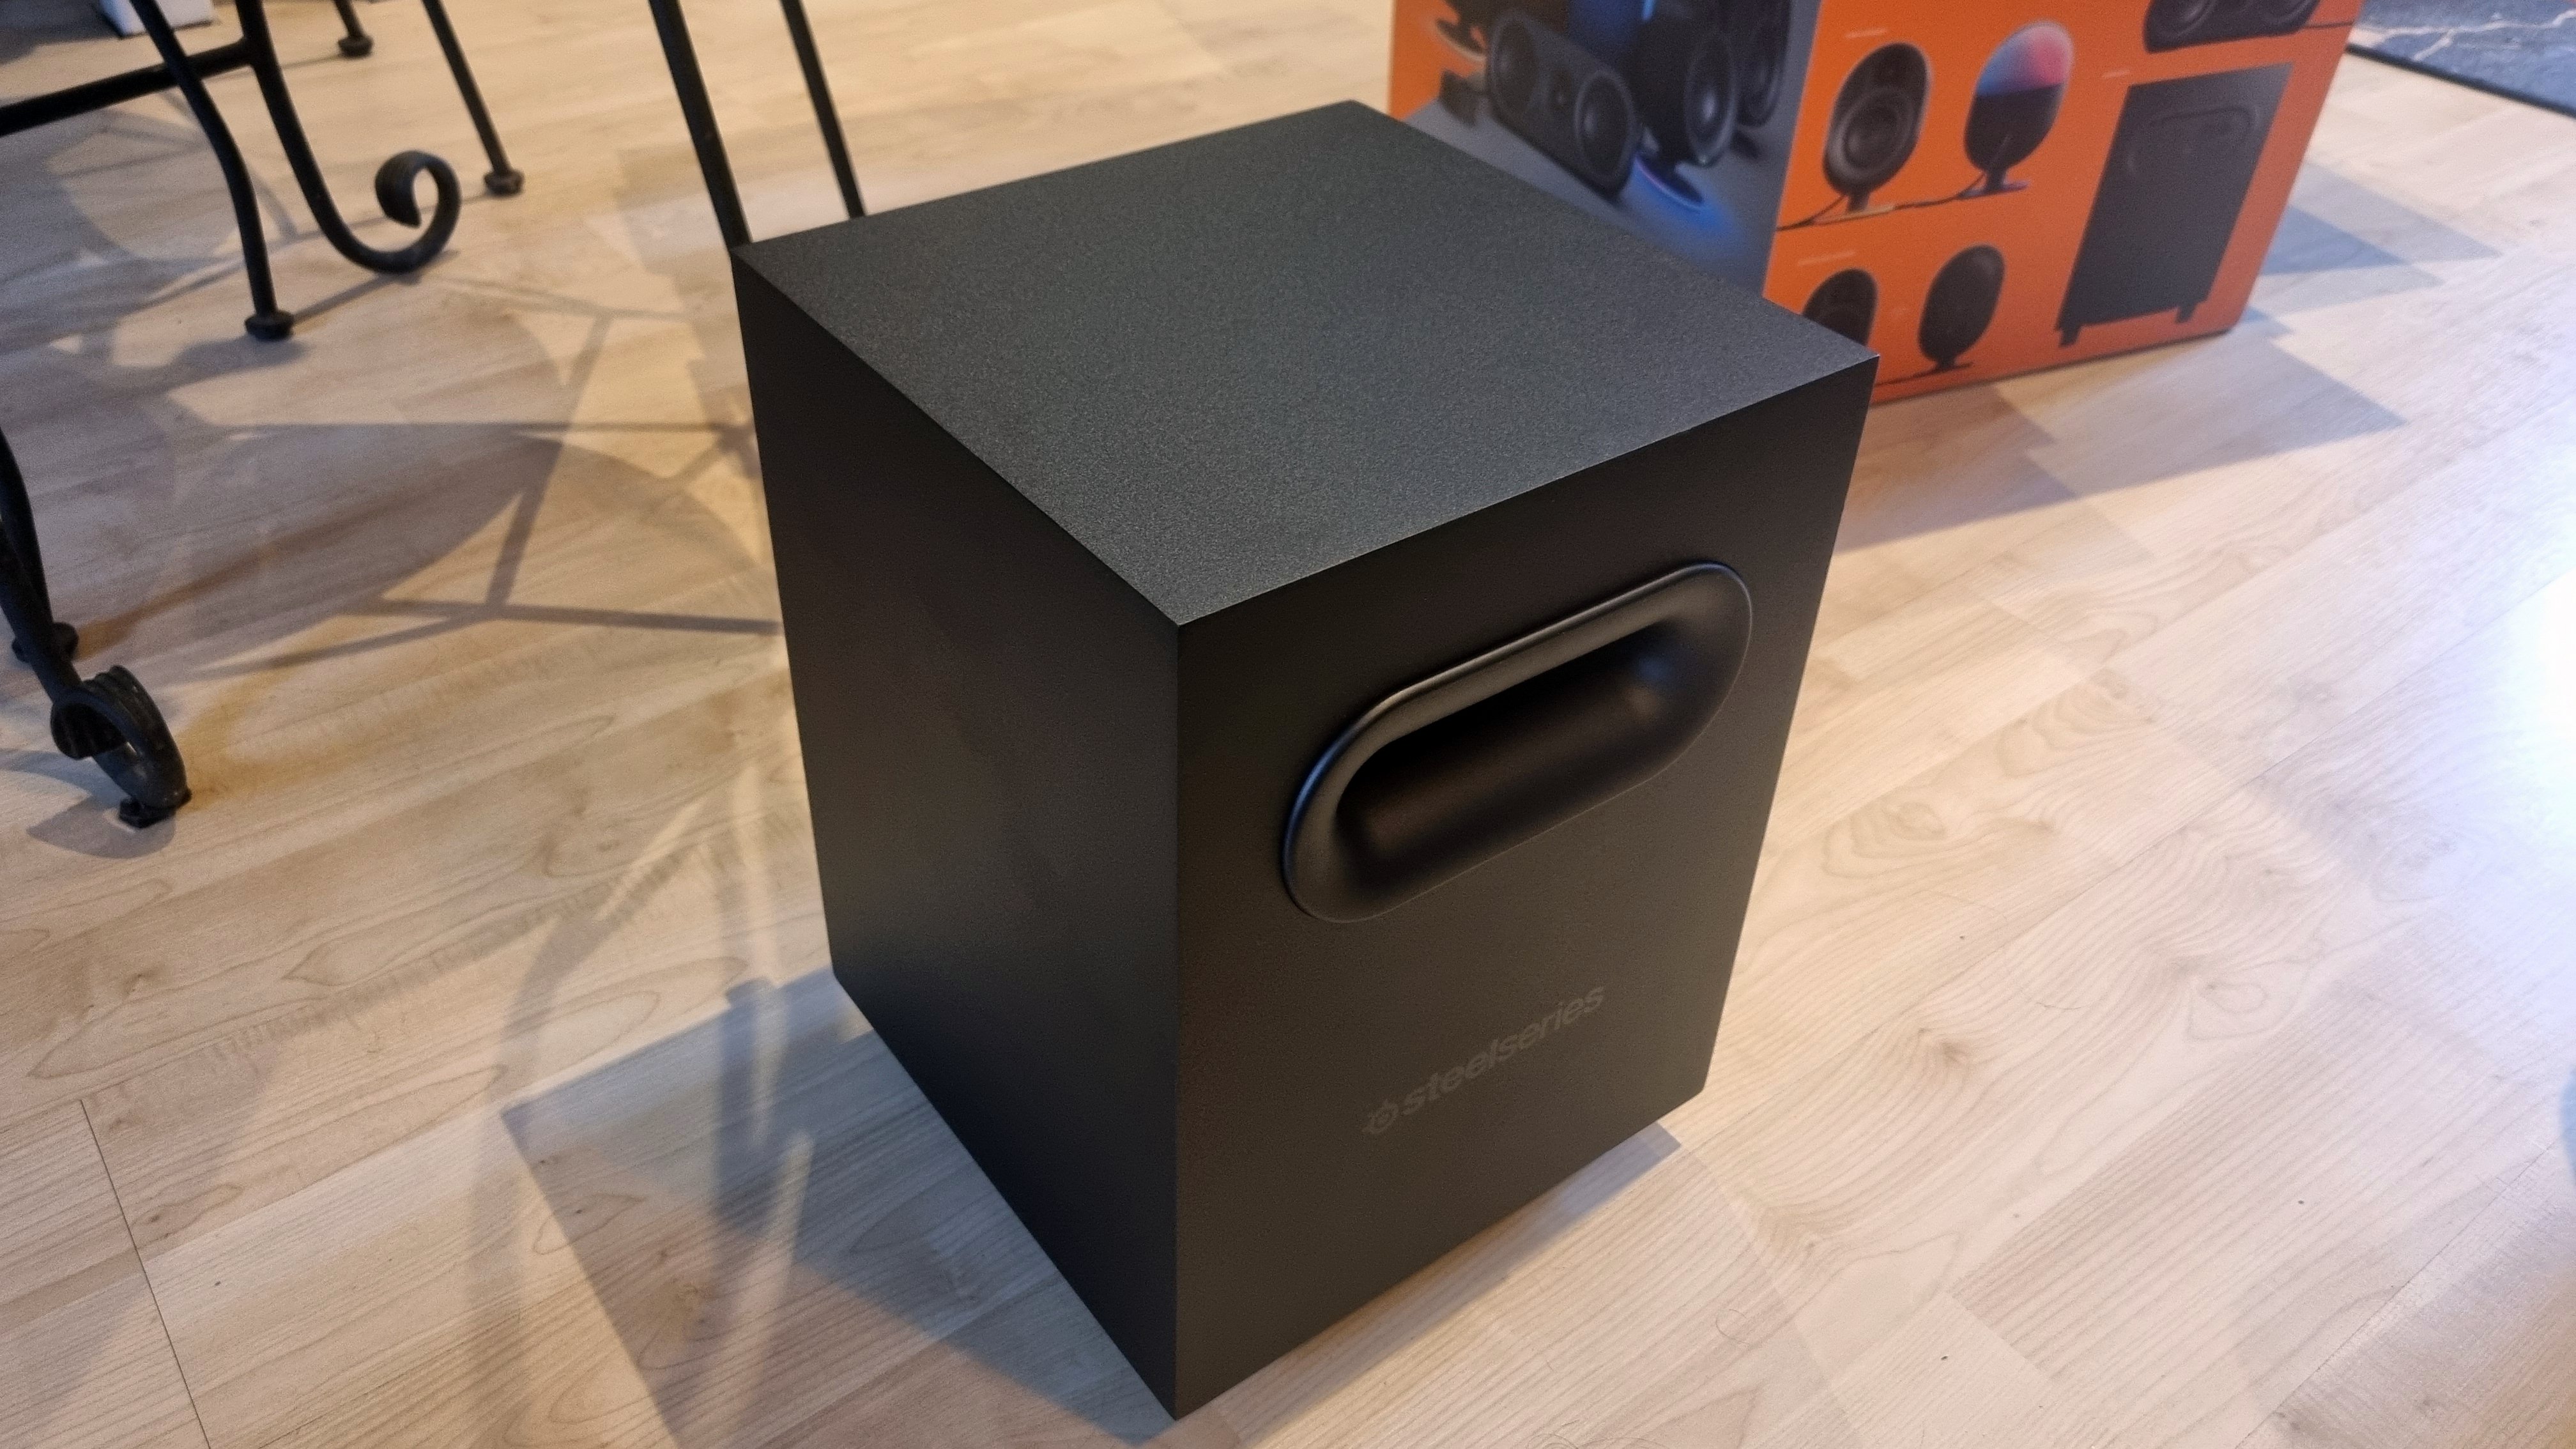 The subwoofer of the SteelSeries Arena 9